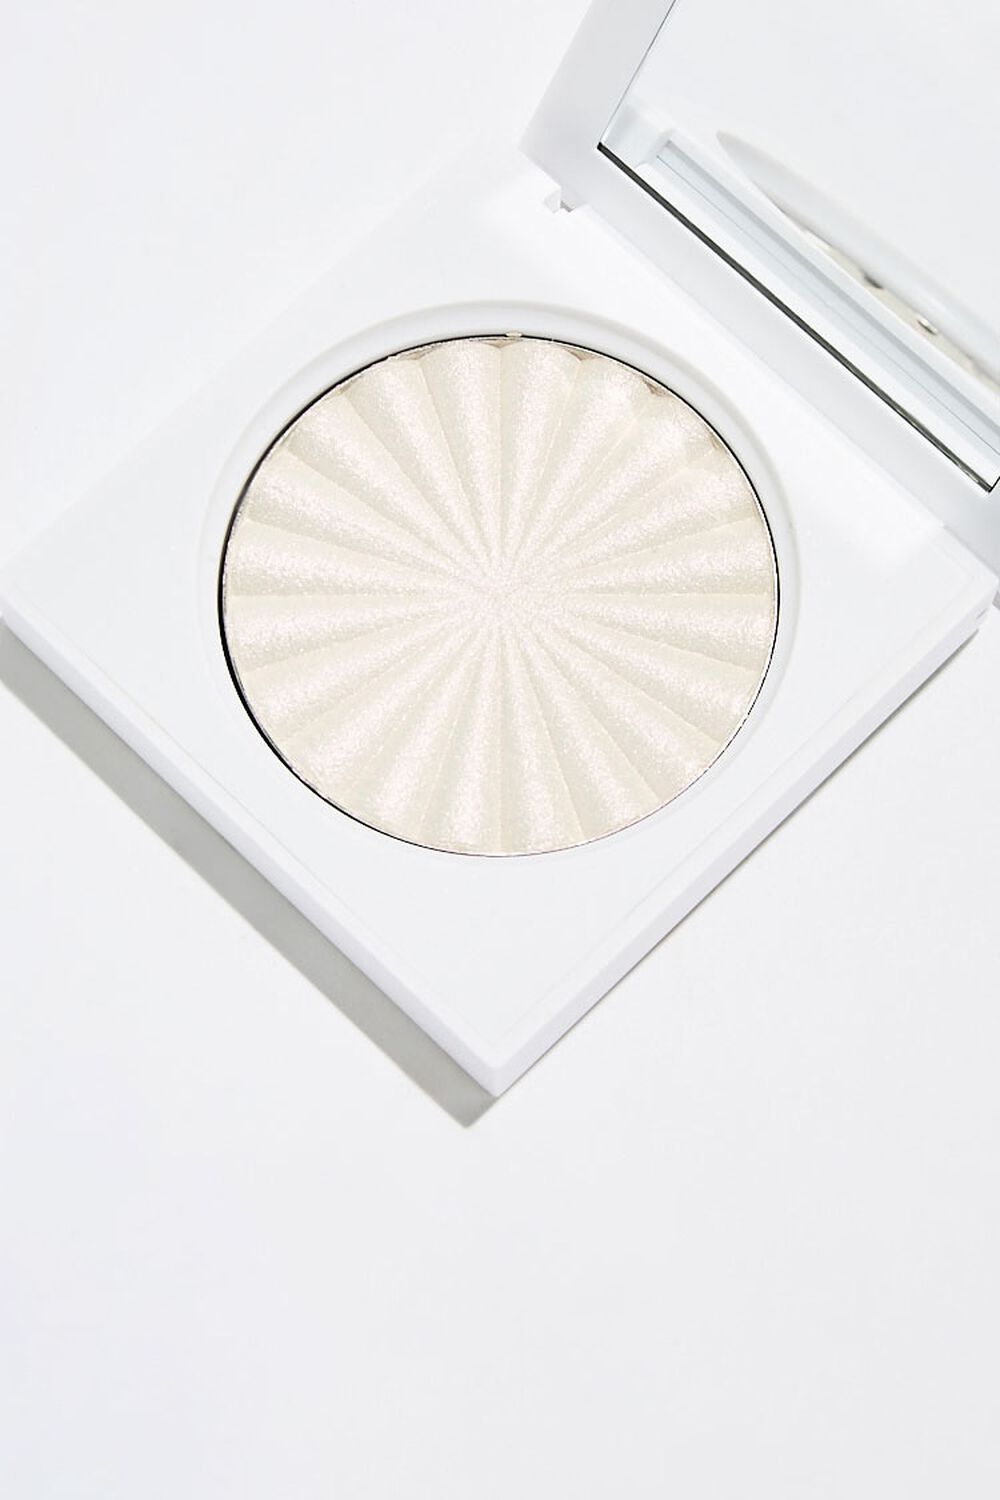 CLOUD 9 Highlighter, image 1